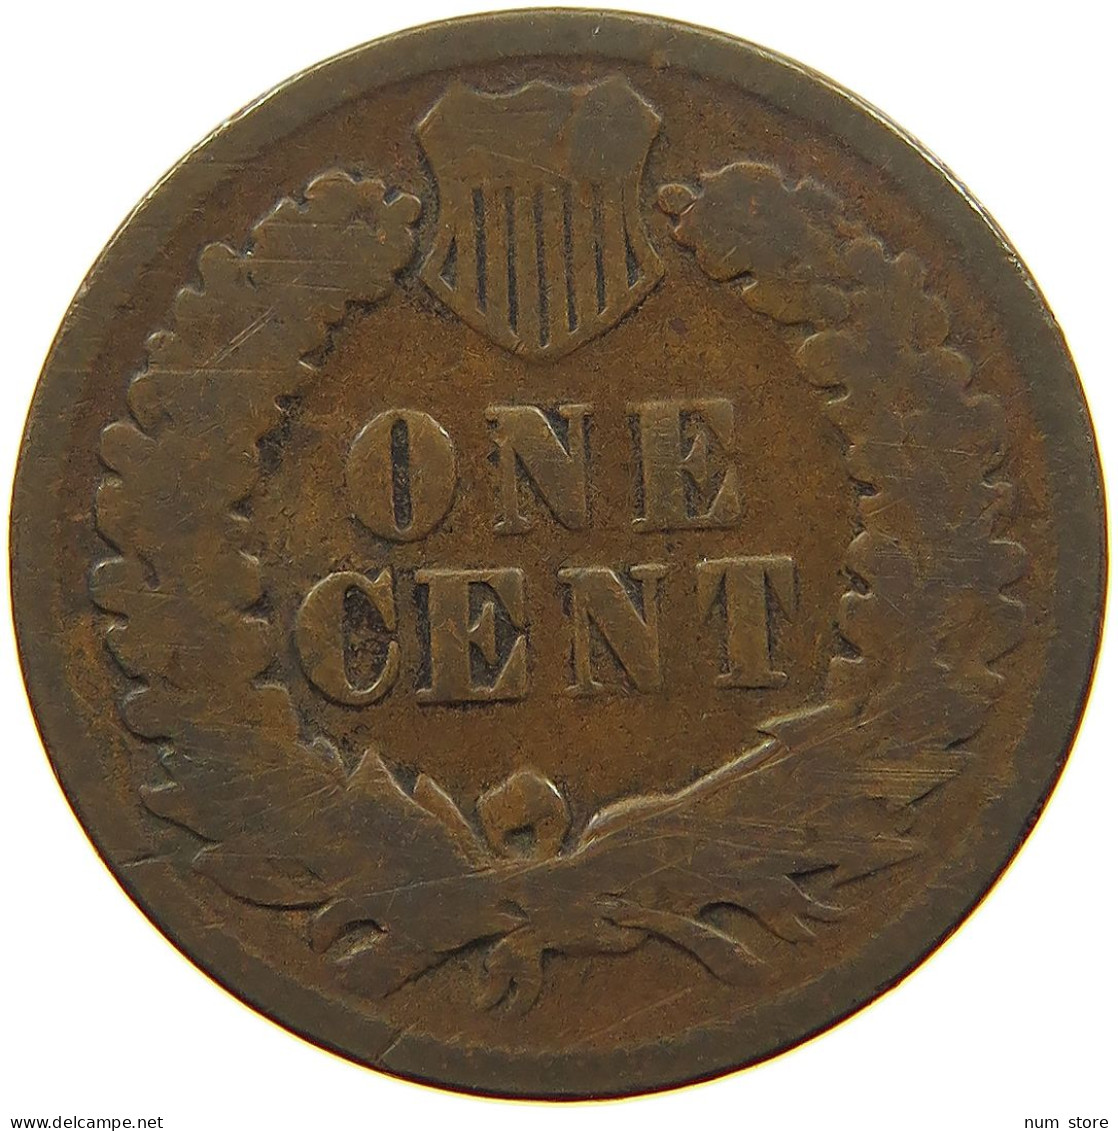 UNITED STATES OF AMERICA CENT 1888 INDIAN HEAD #s063 0049 - 1859-1909: Indian Head